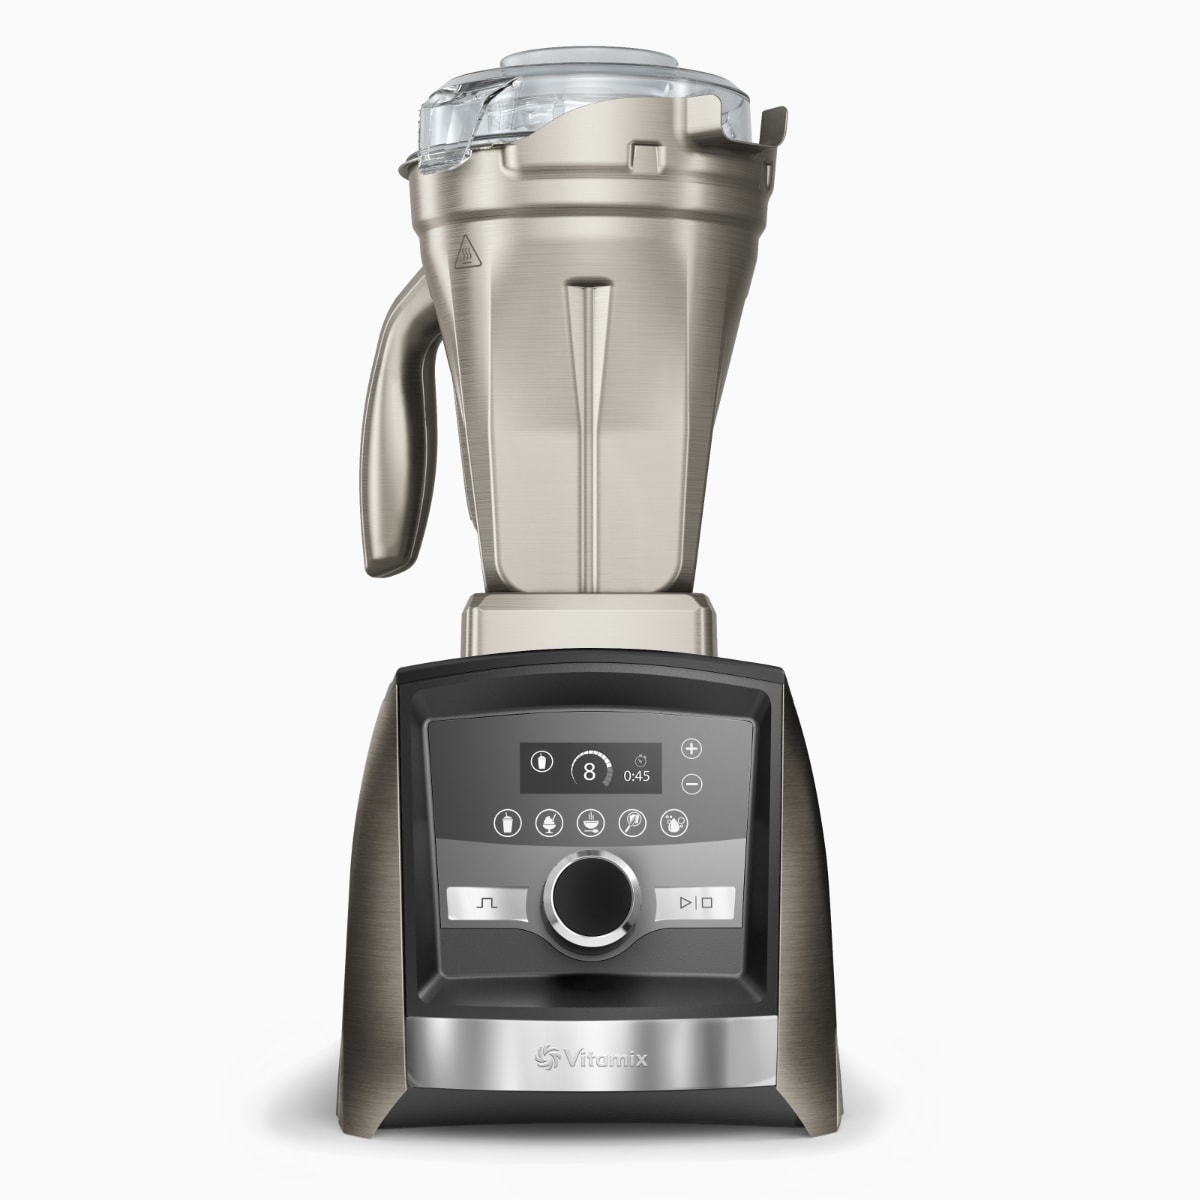 Vitamix A3500 w/ 48-Oz Stainless Steel Container (Black Stainless Metal Finish) $604.95 + Free Shipping